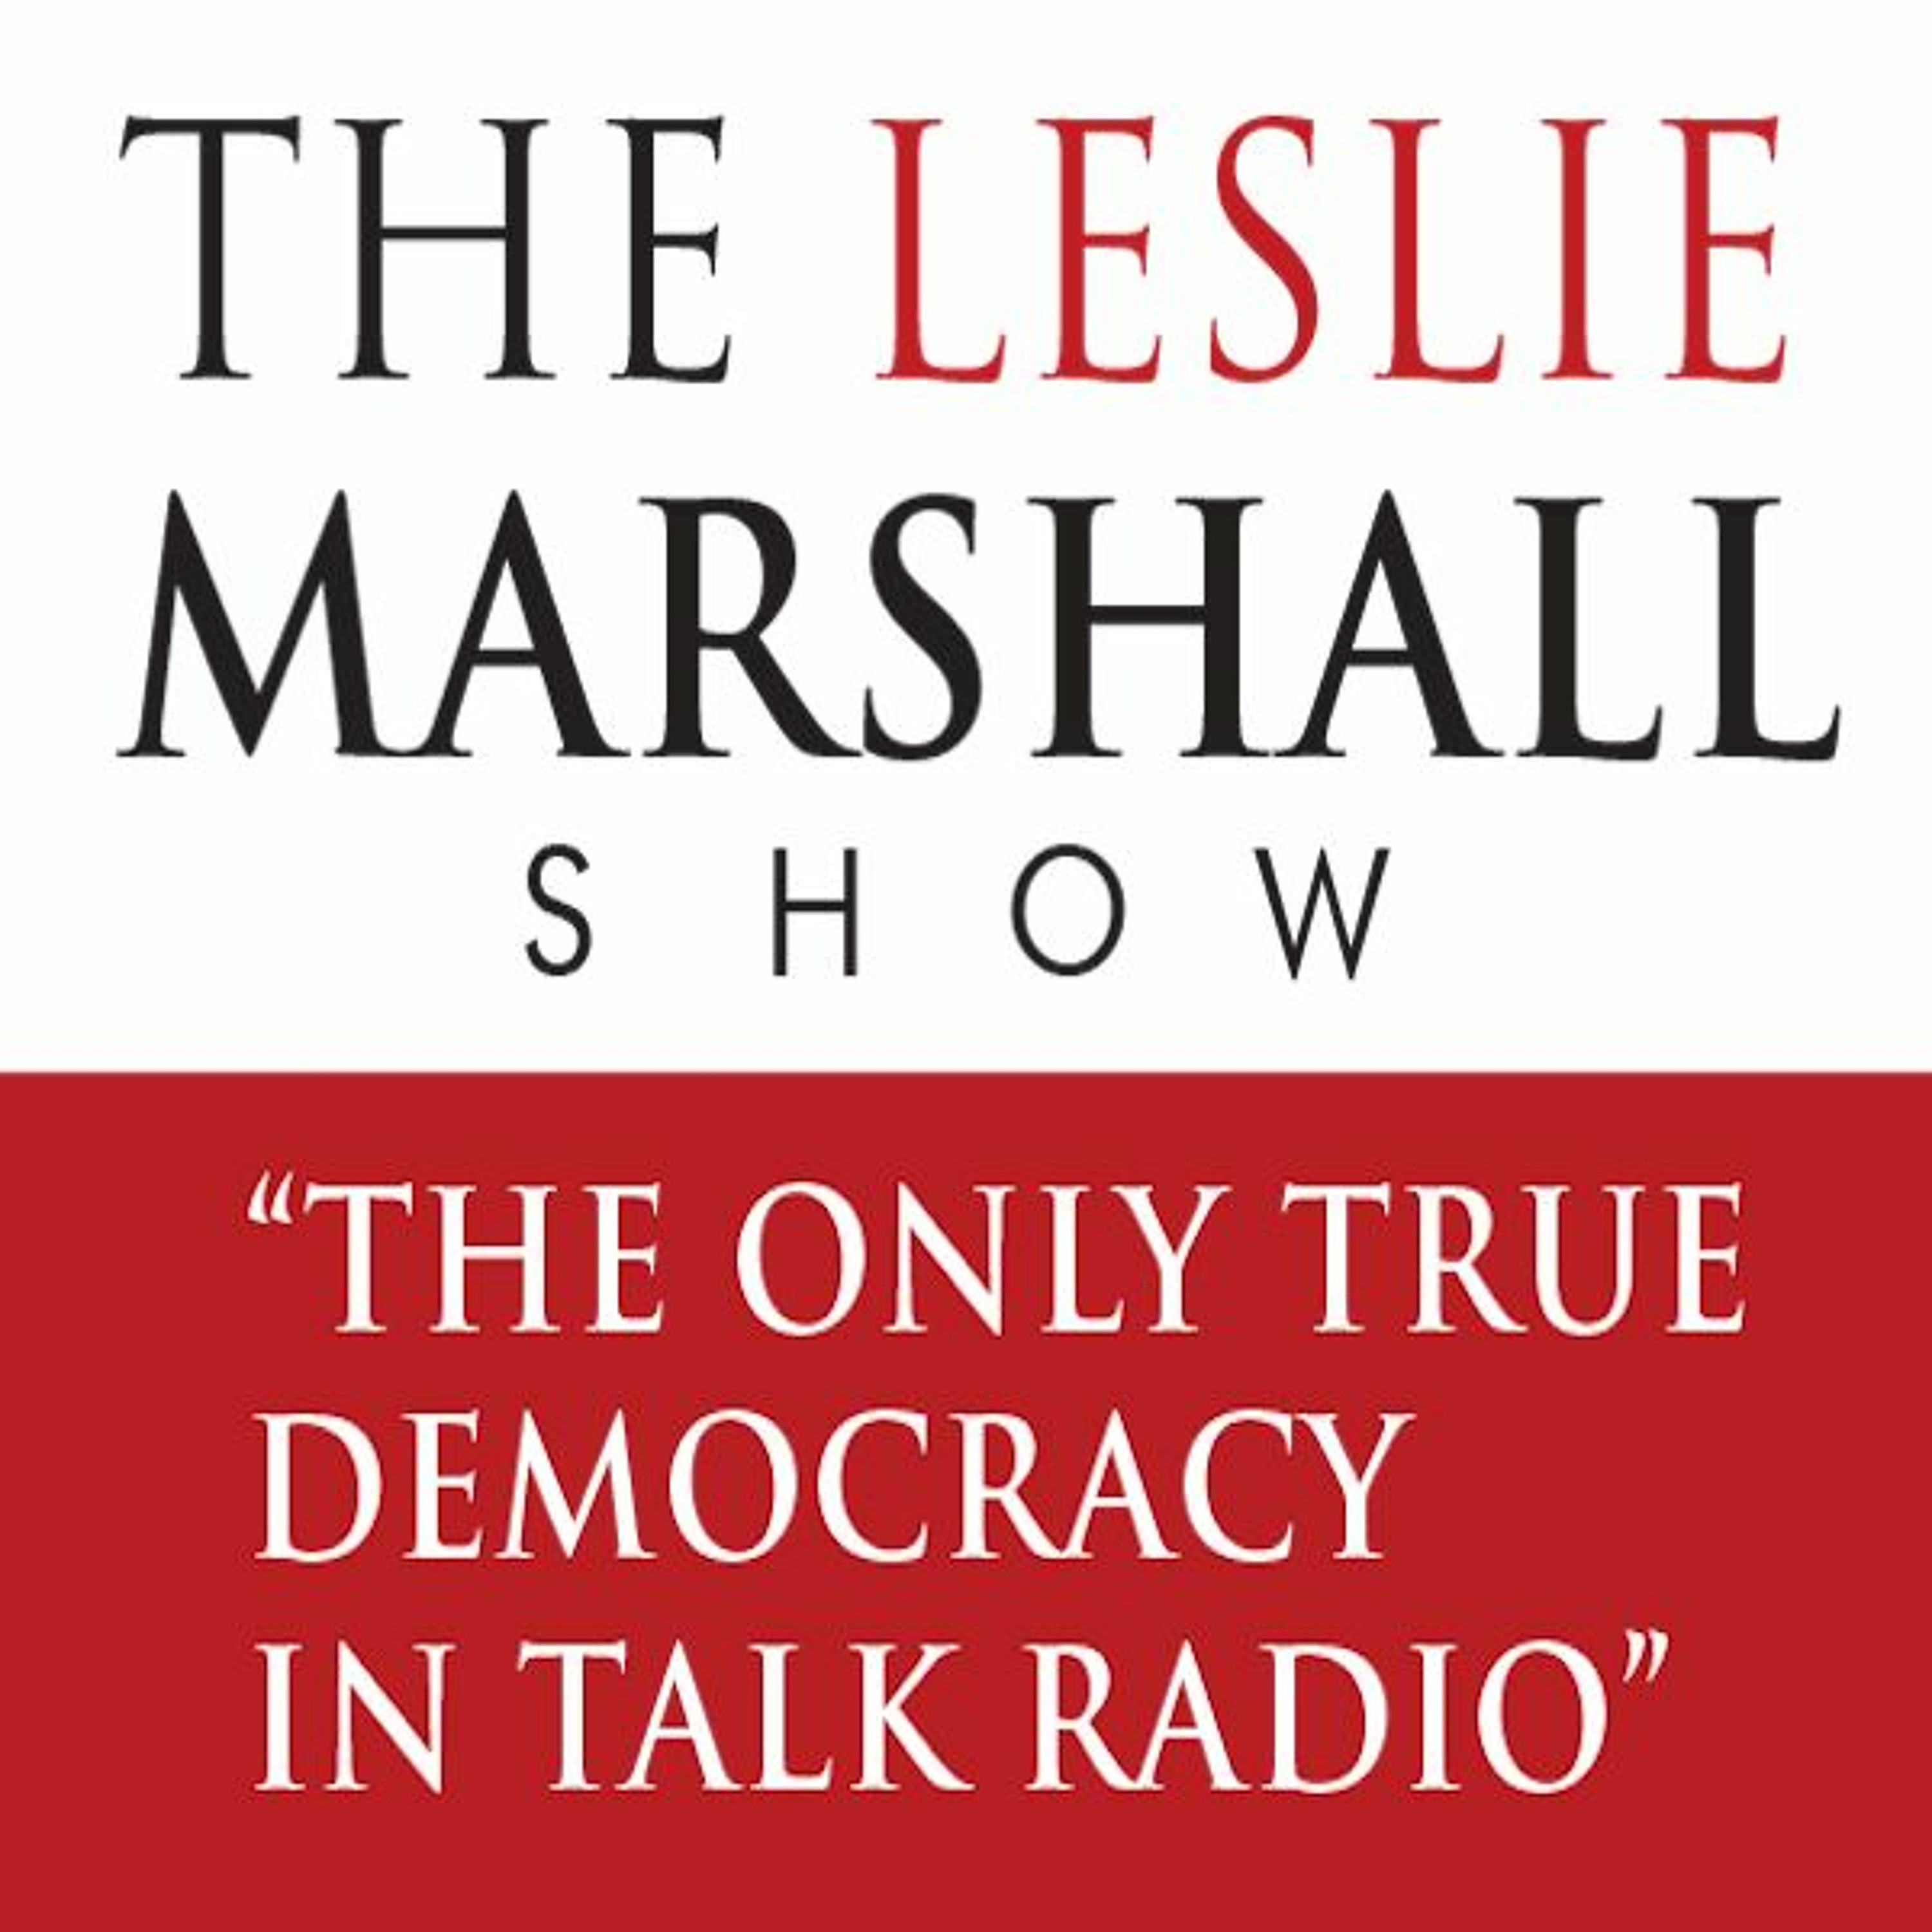 Leslie Marshall Show -1/26/24- Data Don’t Lie: Biden’s Economic Record is Much Better than Trump’s